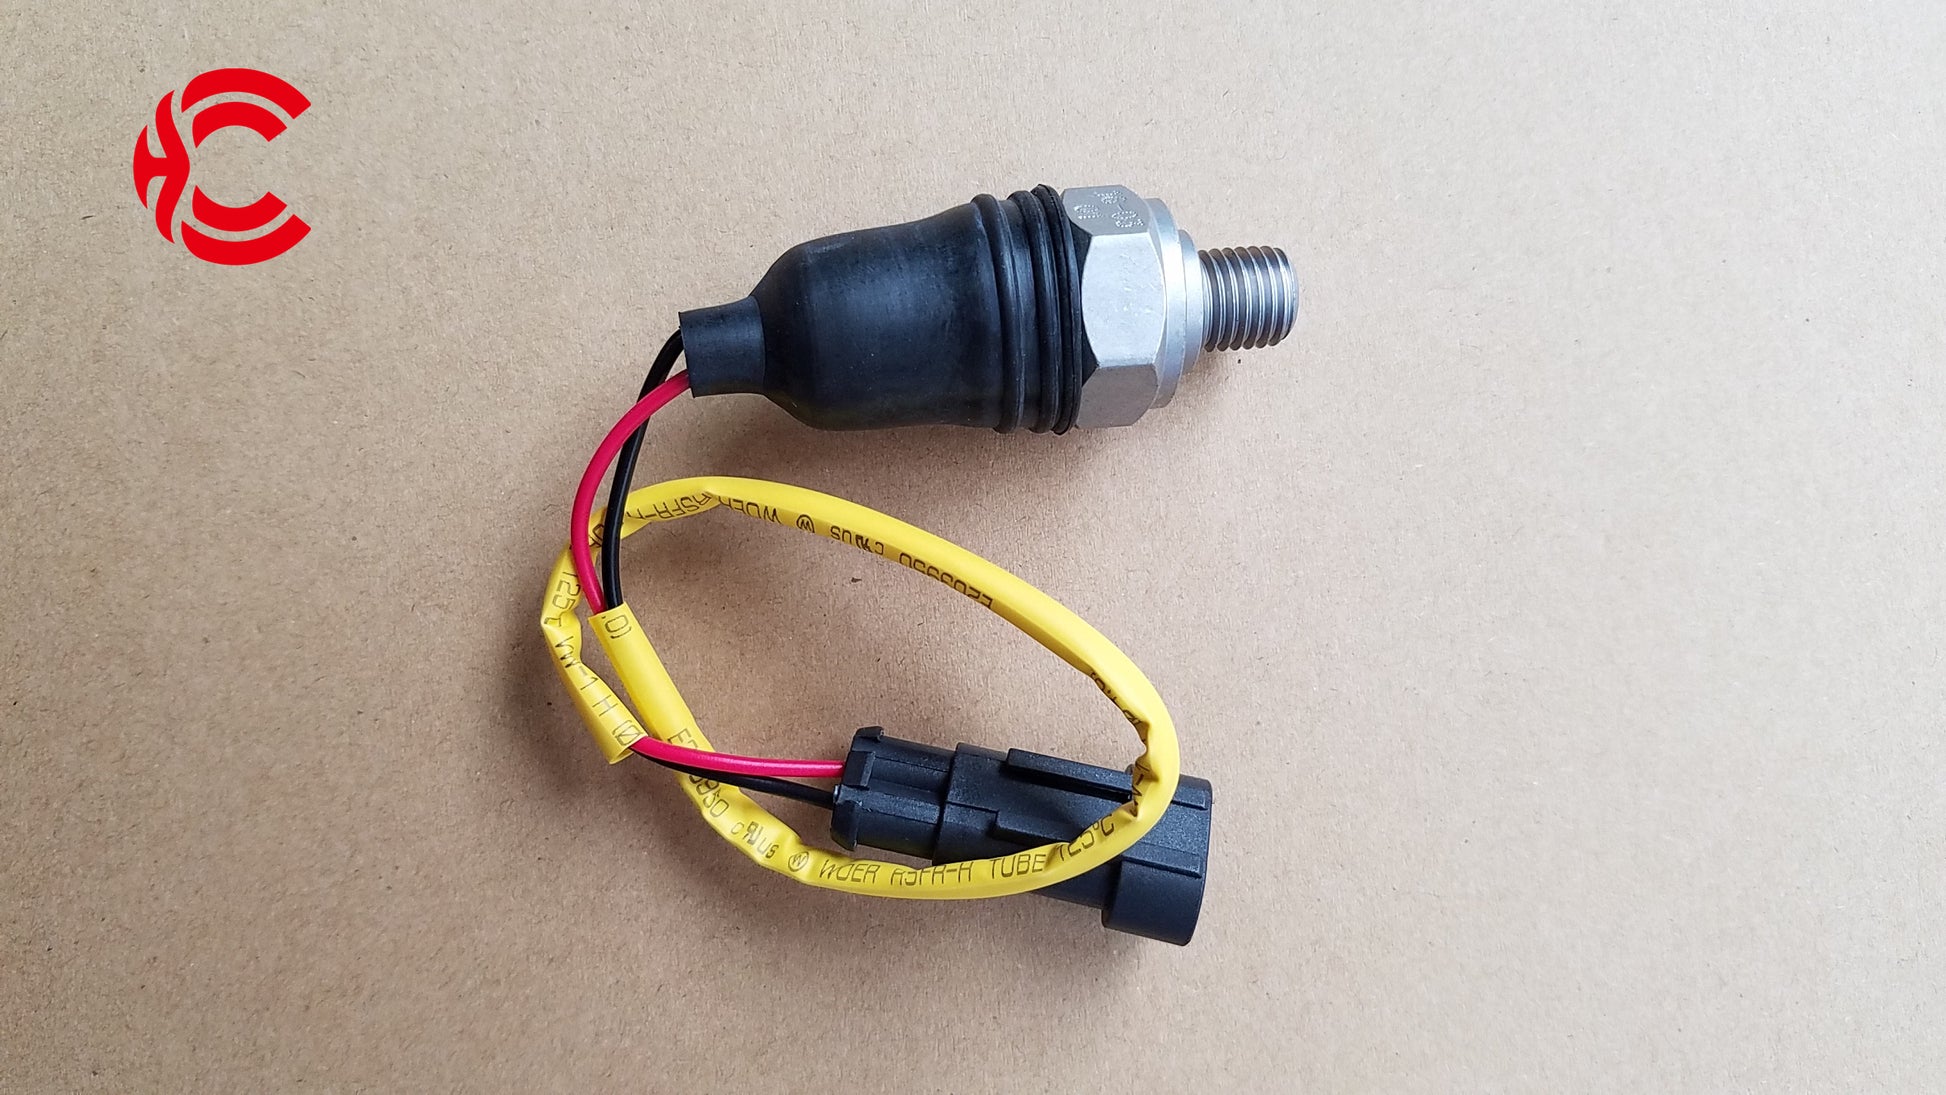 5OEM: 0.65MPa 3624-00039 2103-00188 NOMaterial: ABS metalColor: black silverOrigin: Made in ChinaWeight: 50gPacking List: 1* Brake Light Switch More ServiceWe can provide OEM Manufacturing serviceWe can Be your one-step solution for Auto PartsWe can provide technical scheme for you Feel Free to Contact Us, We will get back to you as soon as possible.